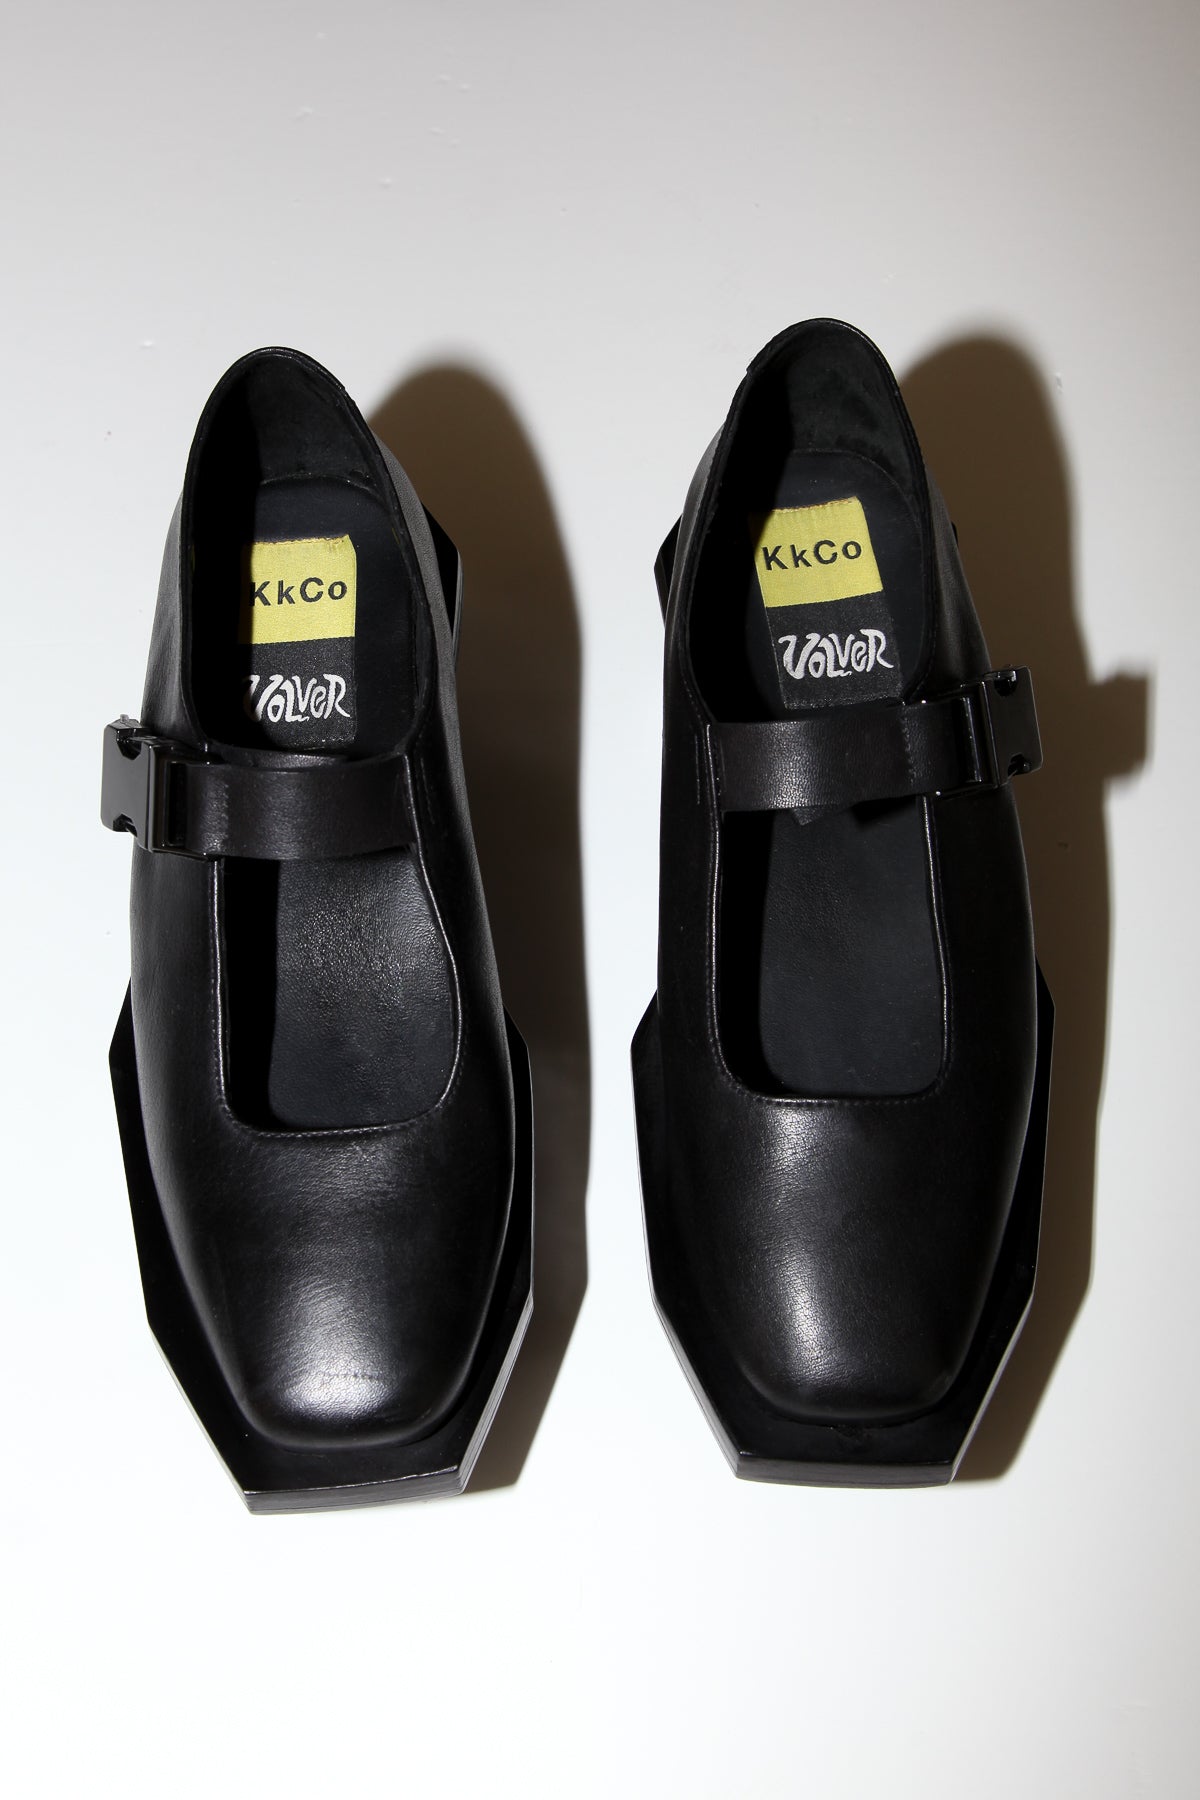 The Mary Jane Clog by KkCo & Volver Workshop